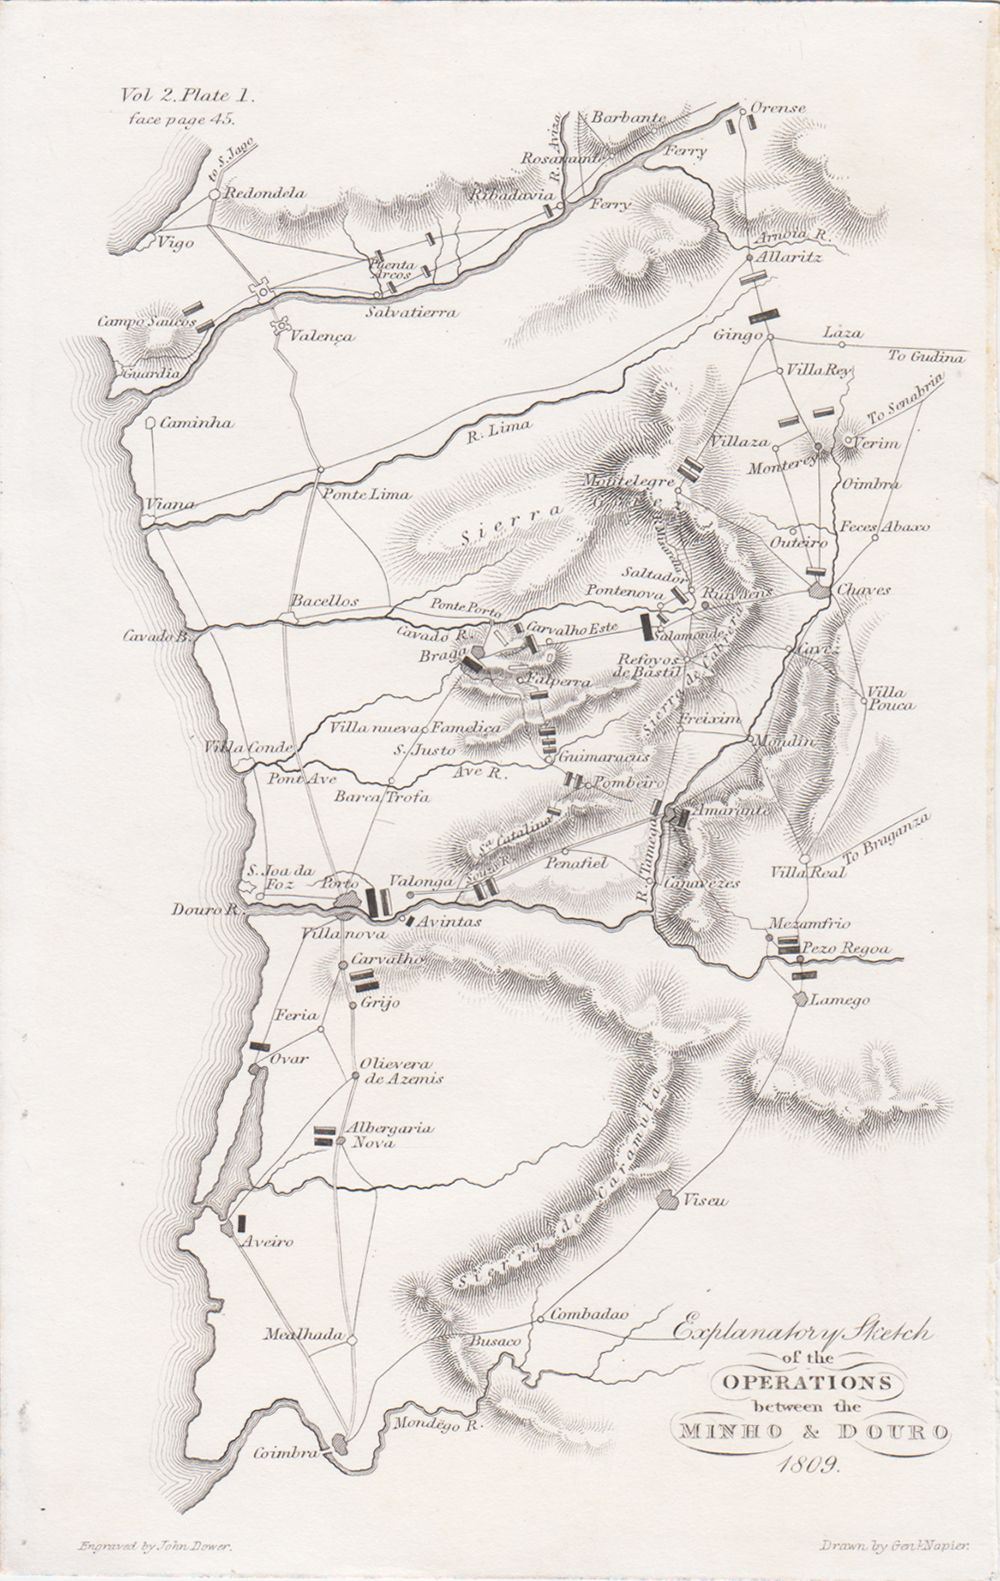 Explanatory Sketch of the Operations between the Minho & Douro 1809